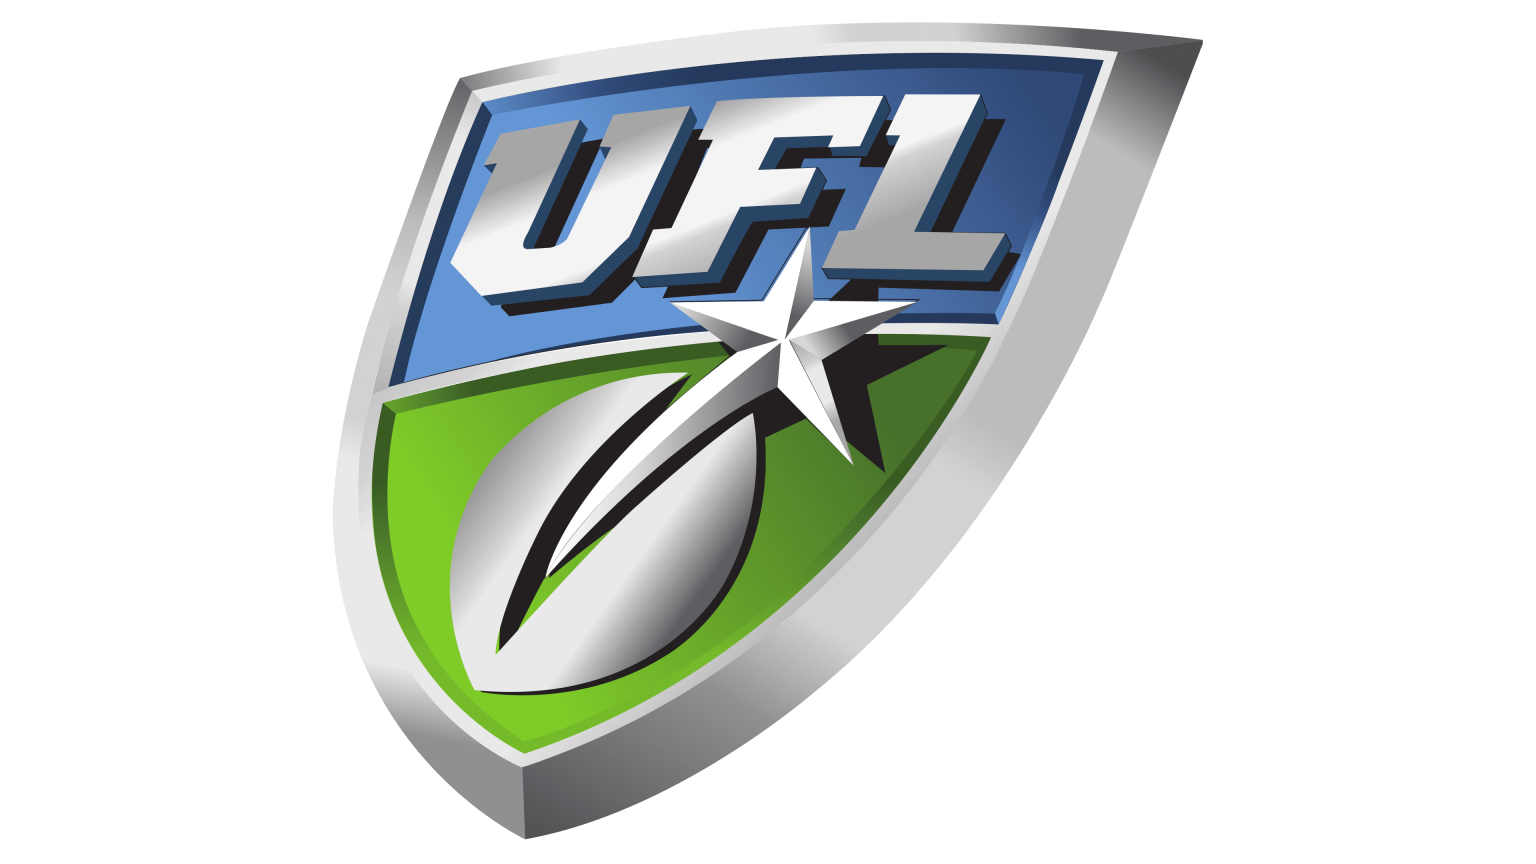 United Football League (UFL) logo and symbol, meaning, history, PNG, brand